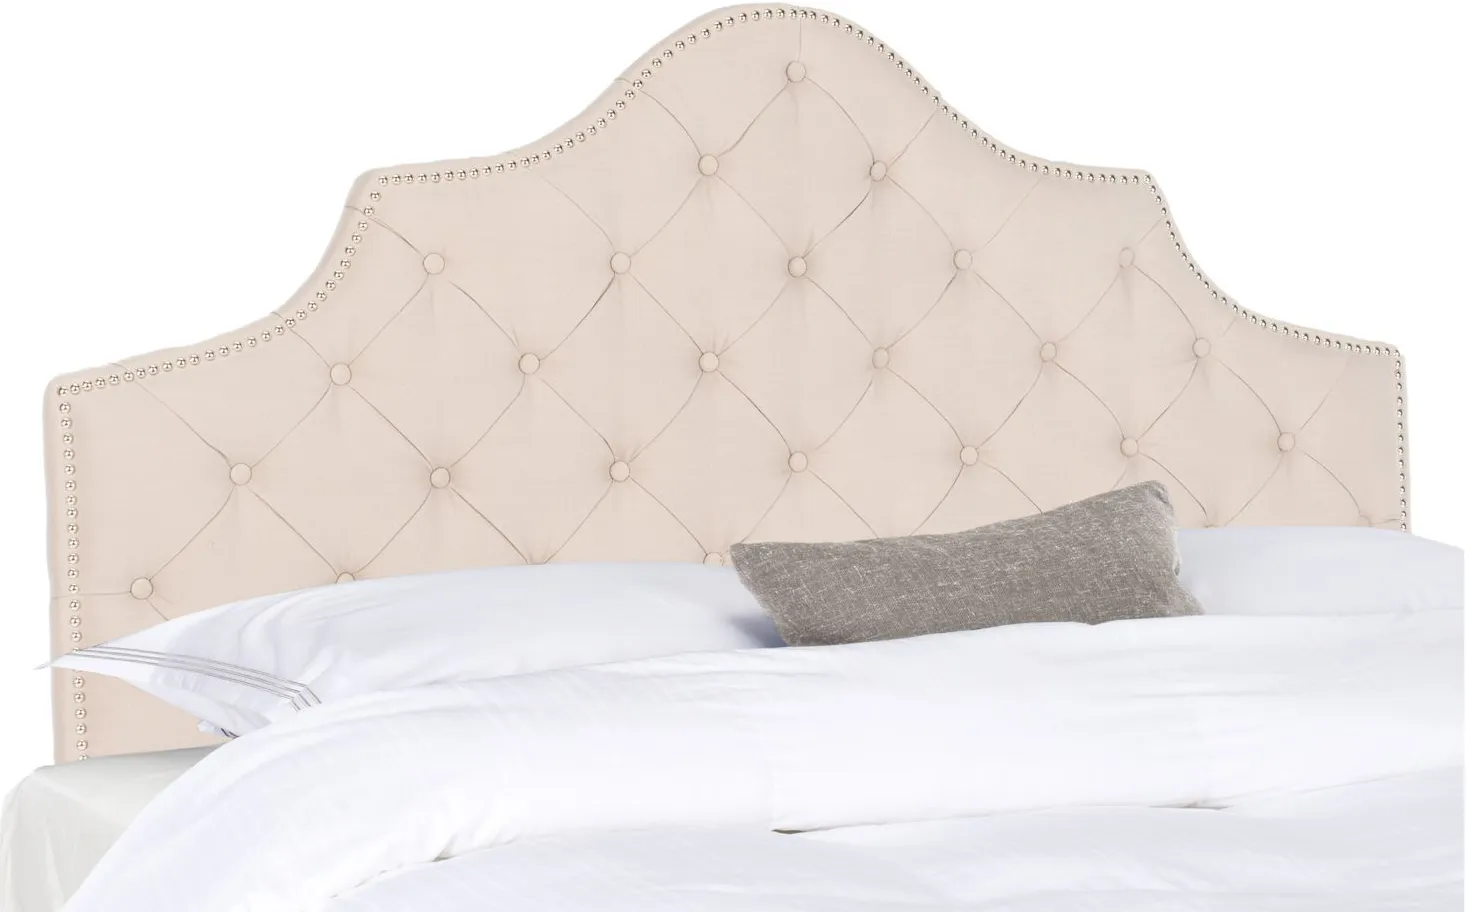 Arebelle Upholstered Headboard in Taupe by Safavieh